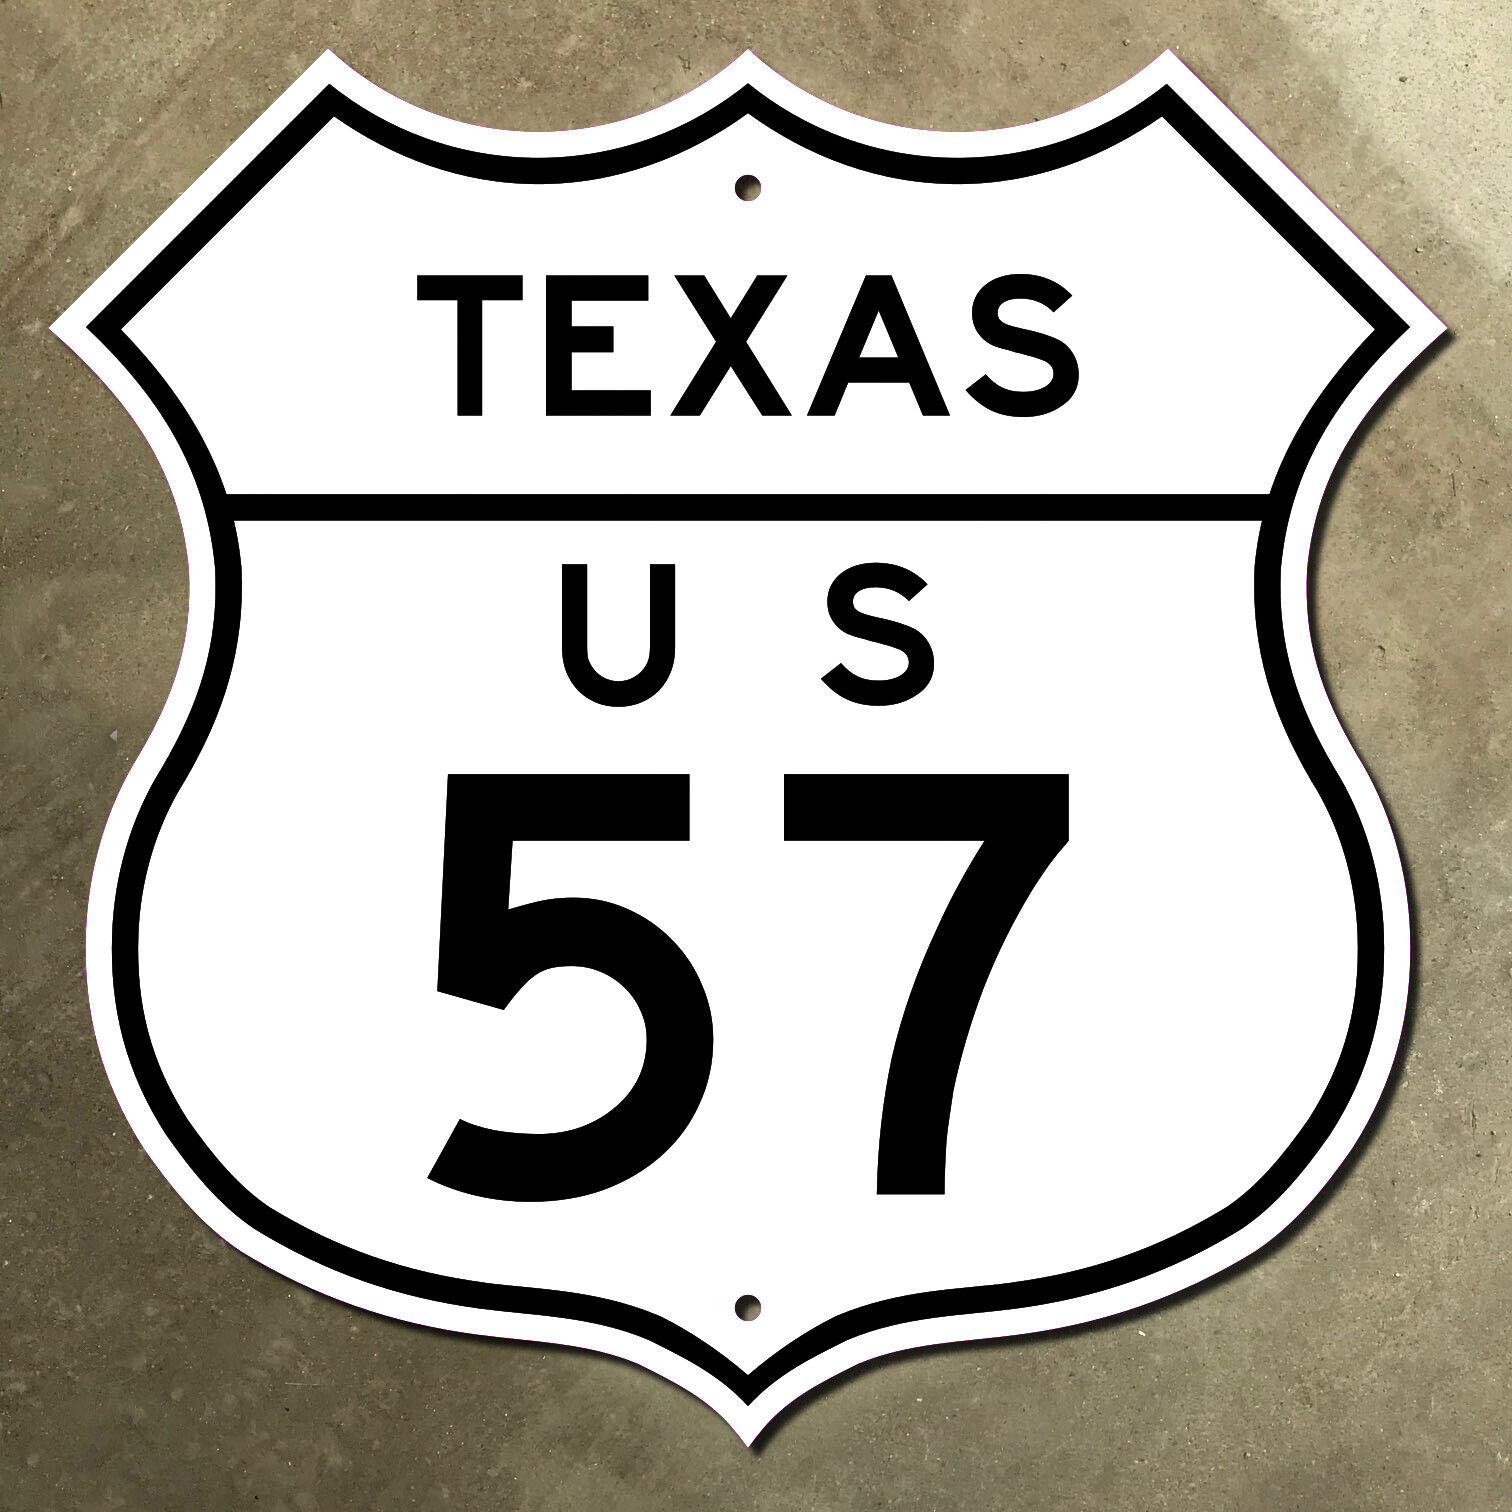 Texas US highway 57 route shield road sign 1970 Mexico Eagle Pass 16x16